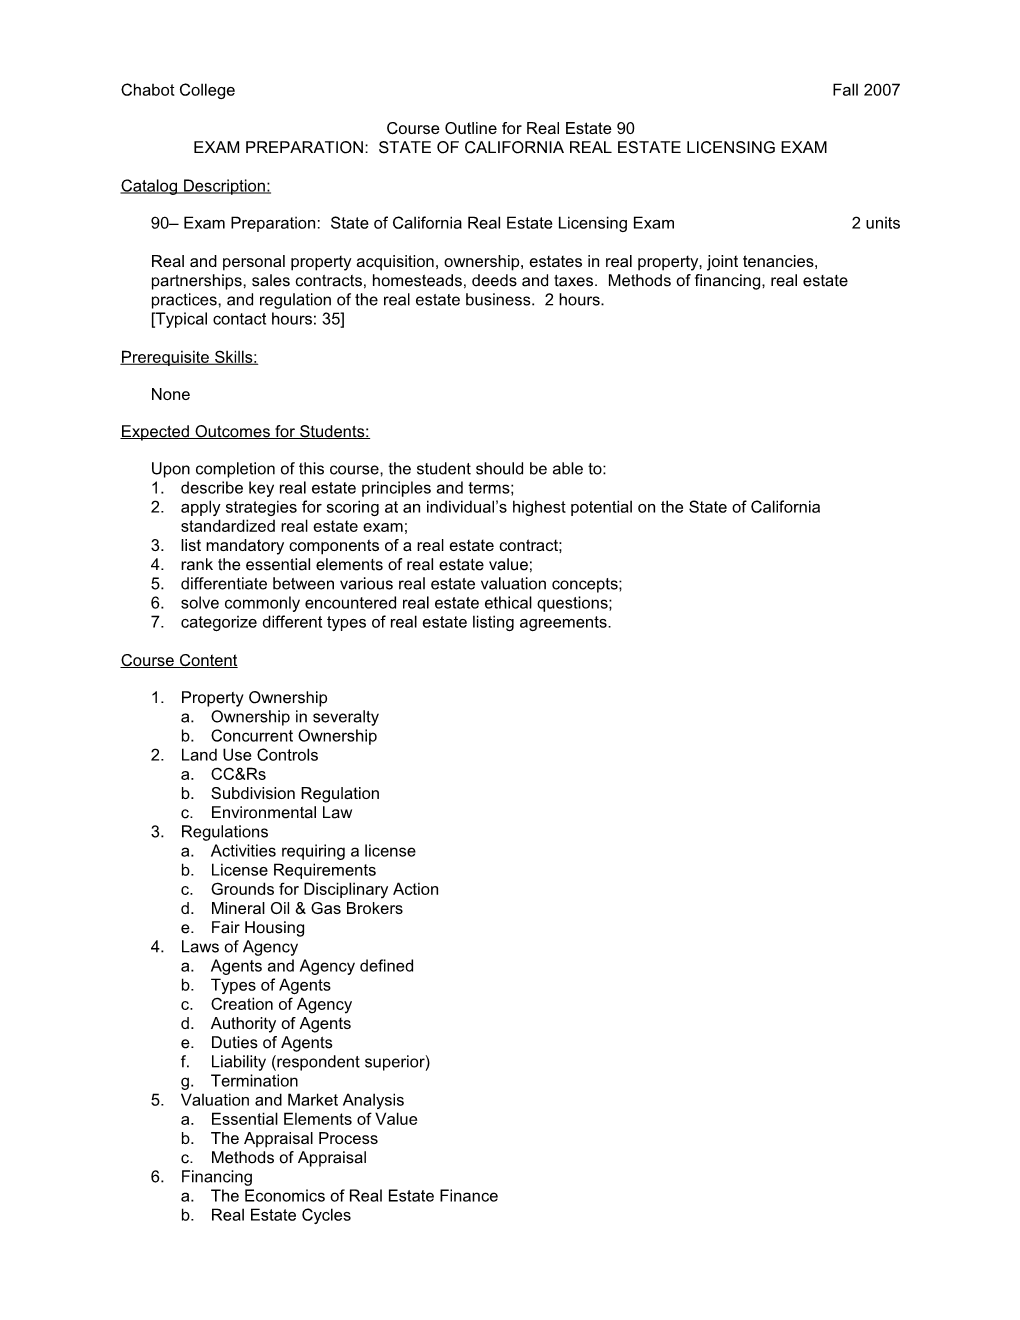 Course Outline for Real Estate 90, Page 2